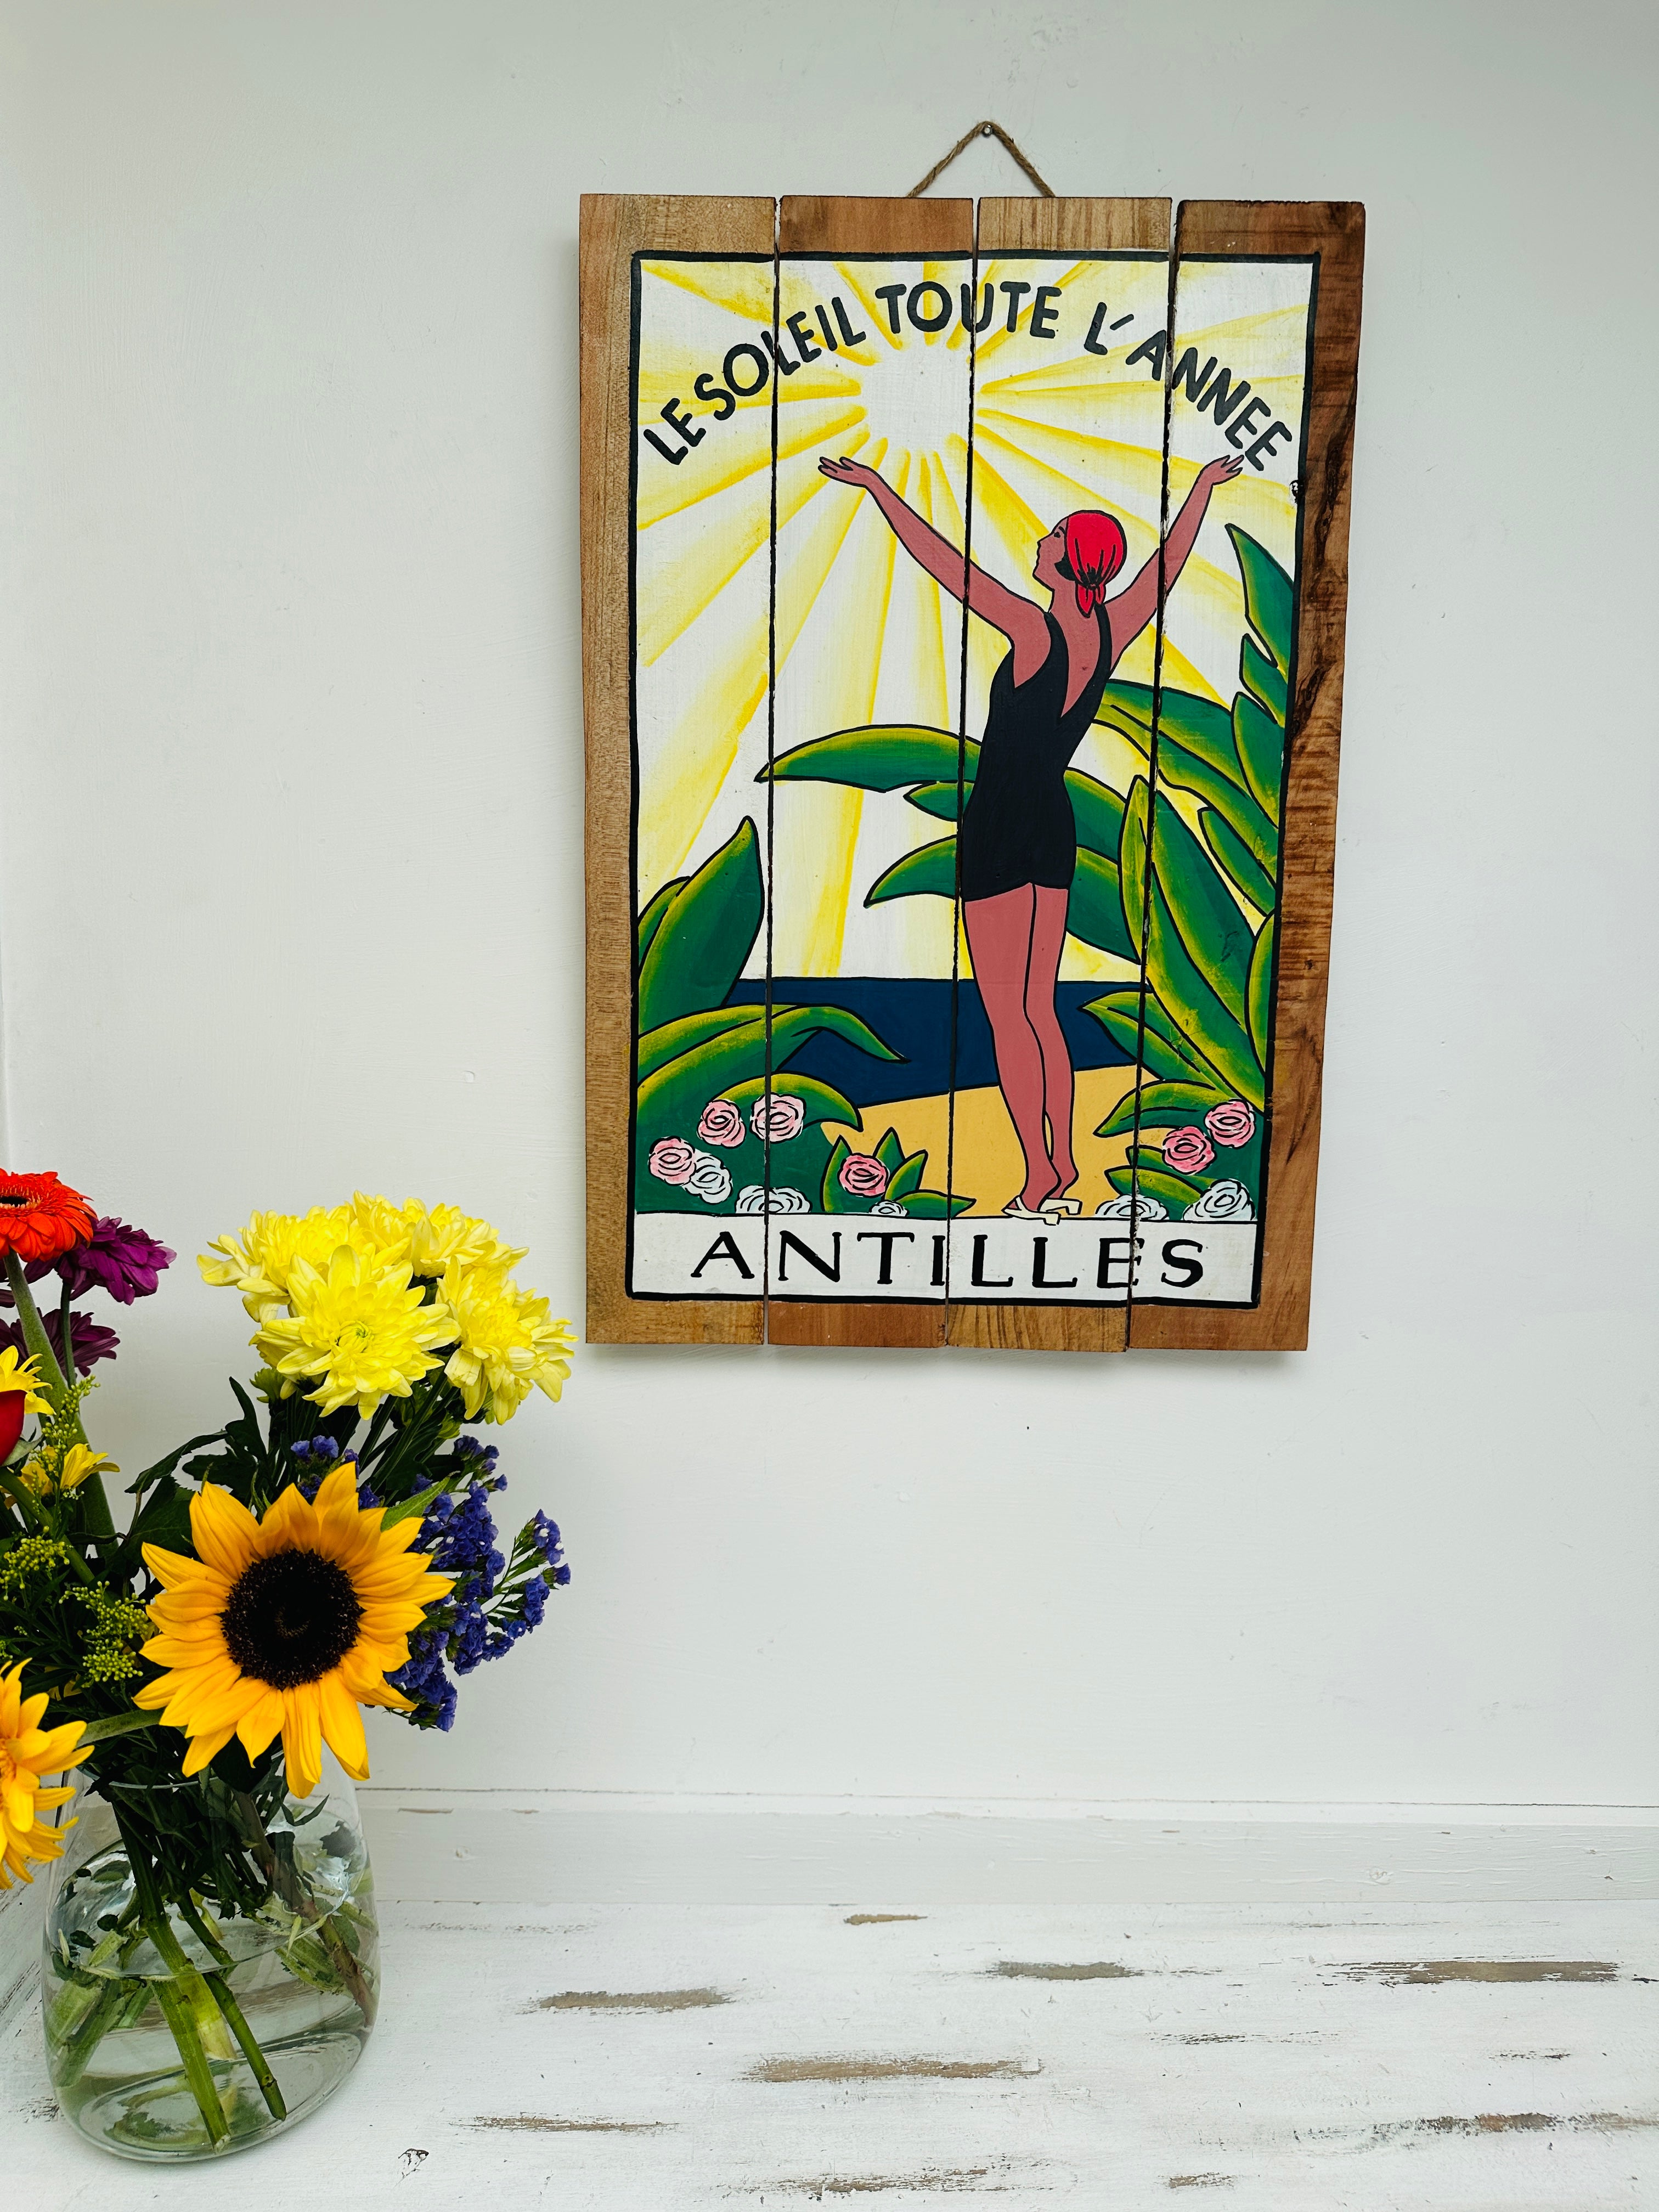 display view of antilles sign with a vase of flowers